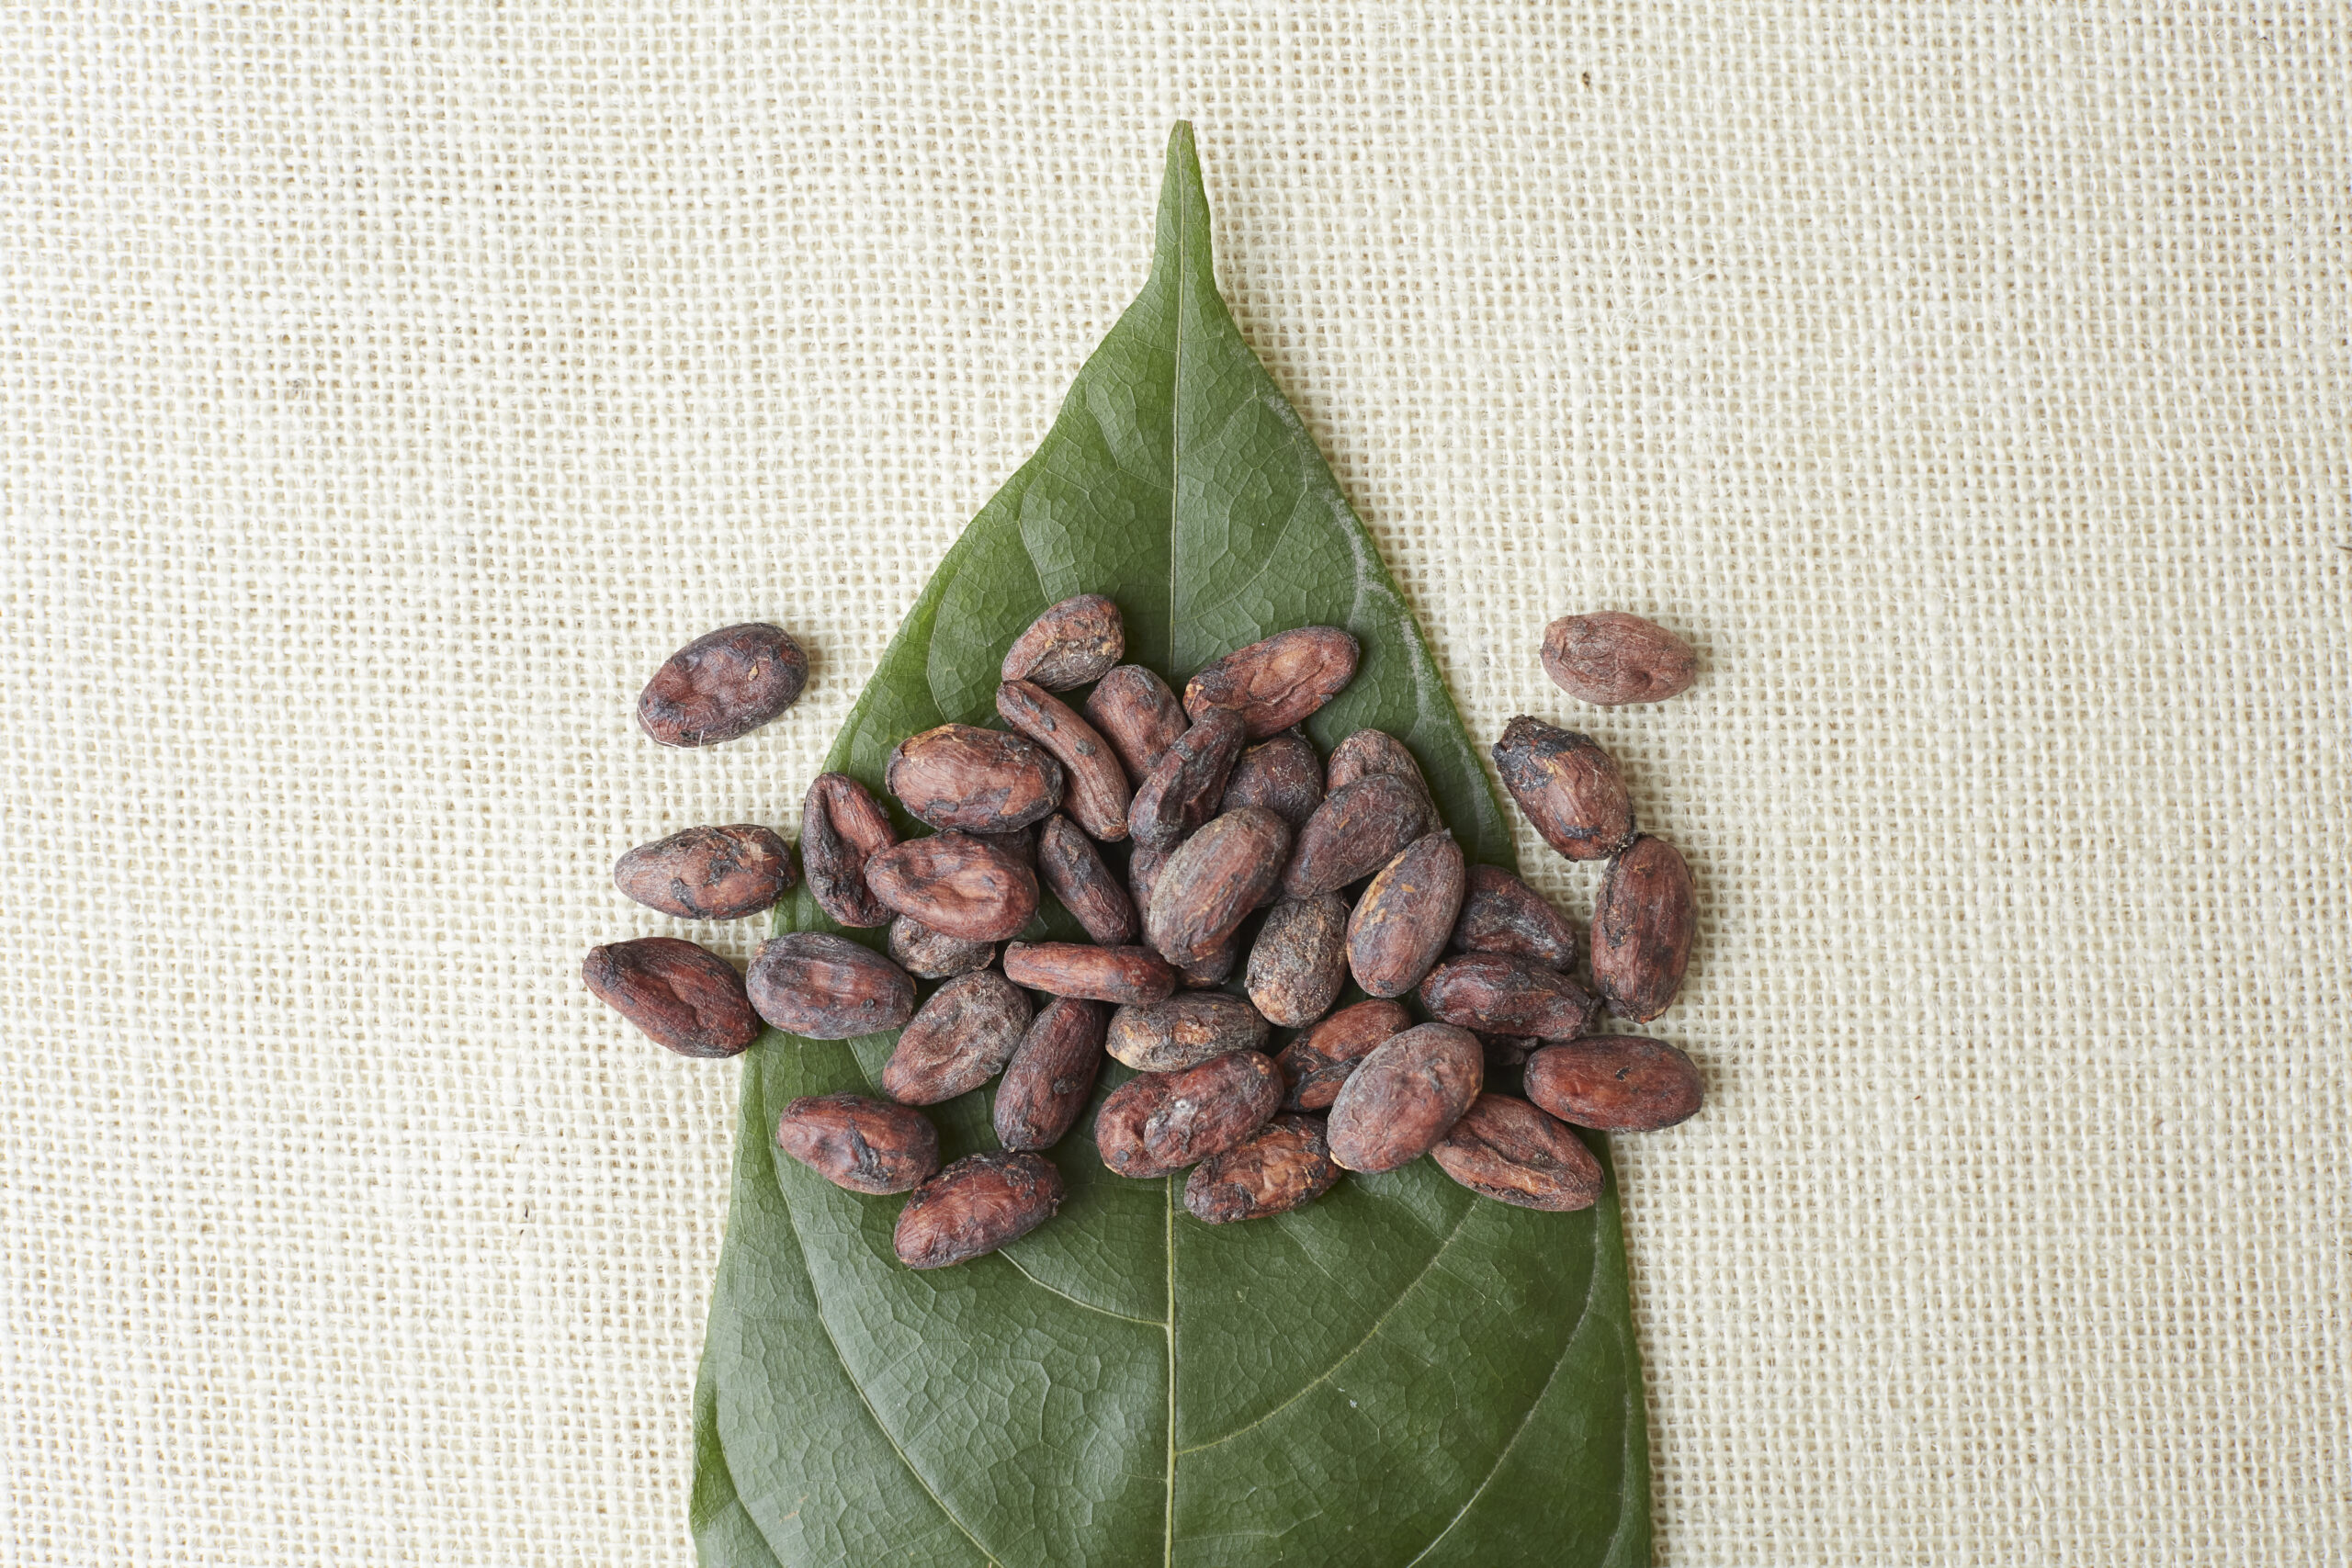 Cacao feves